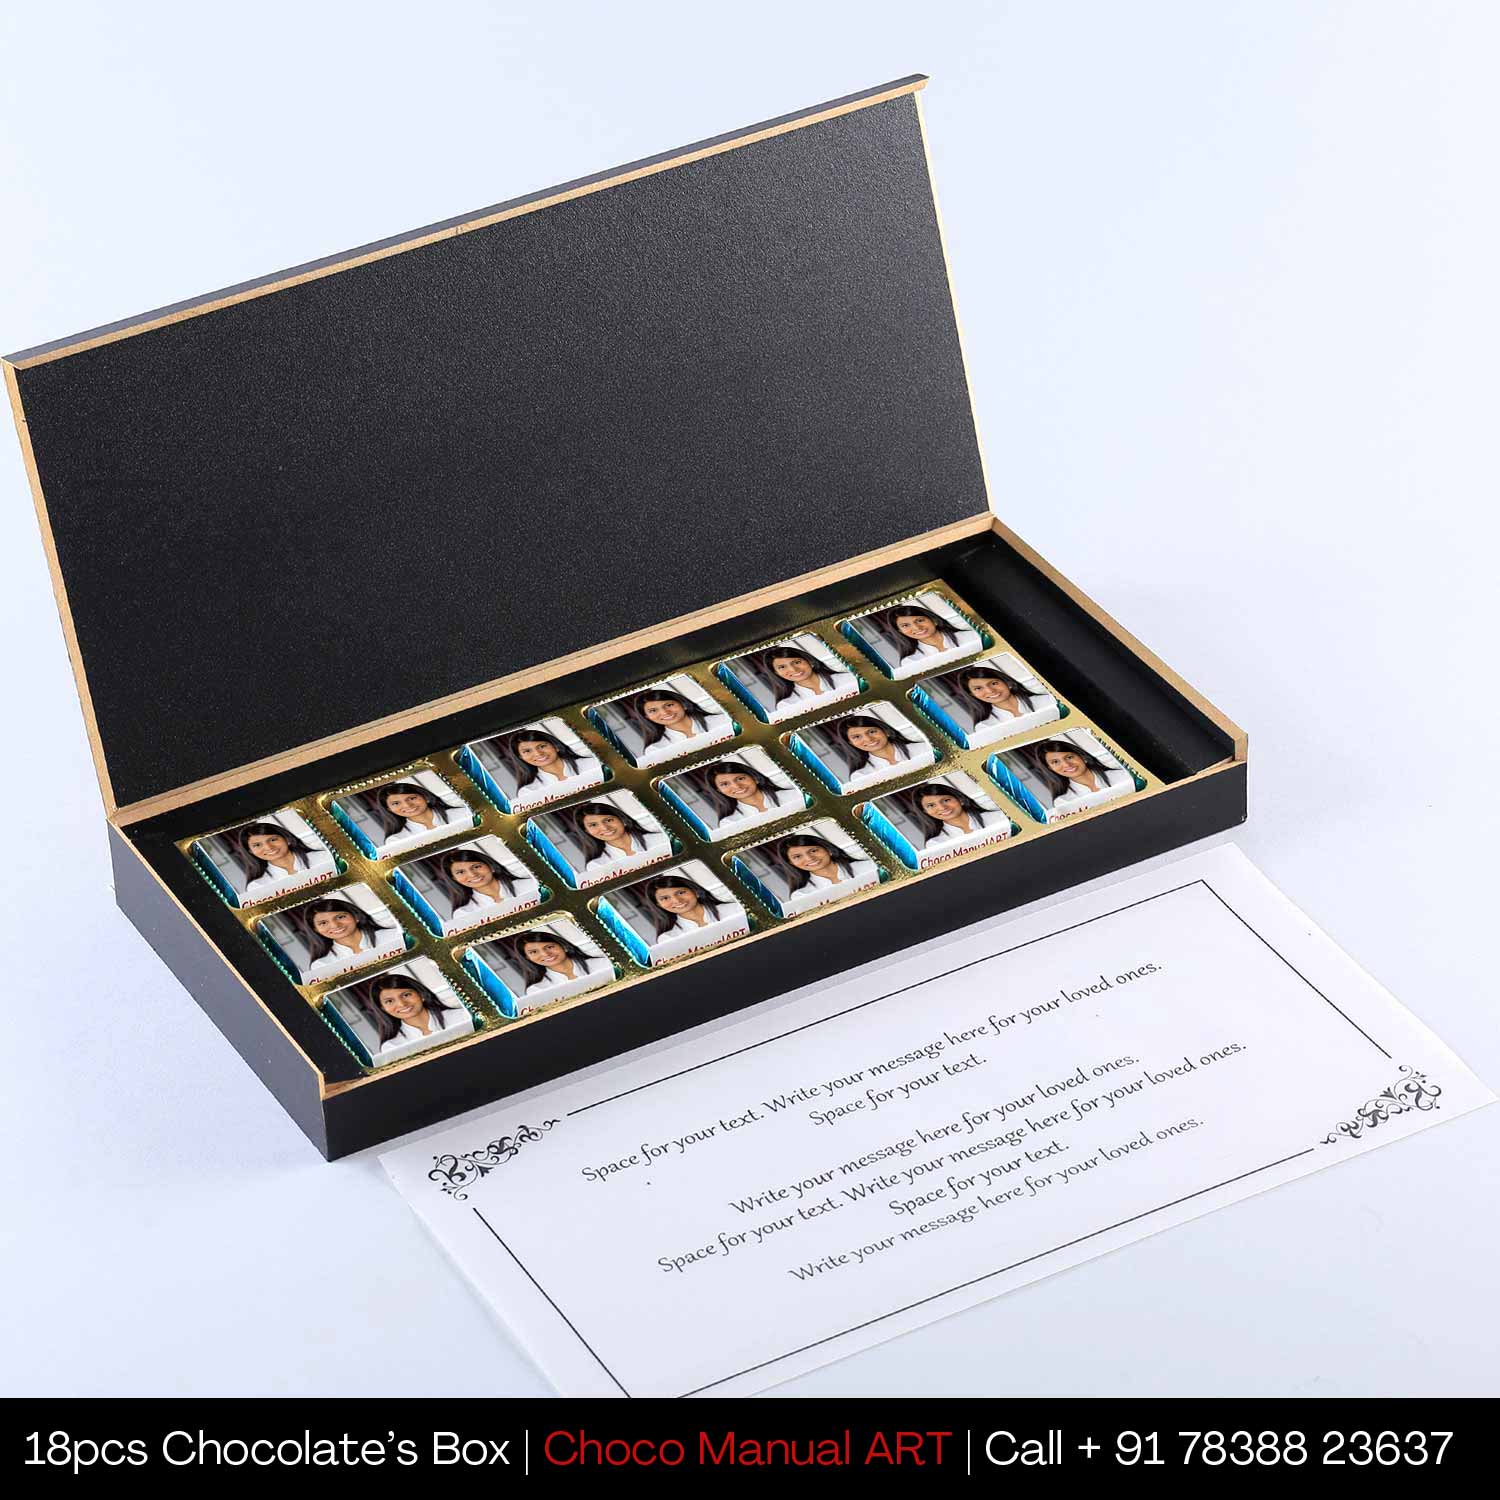 Corporate Chocolate Gift Ideas & Office Gifts for Employee's Birthdays I Elegant gift with wooden packaging